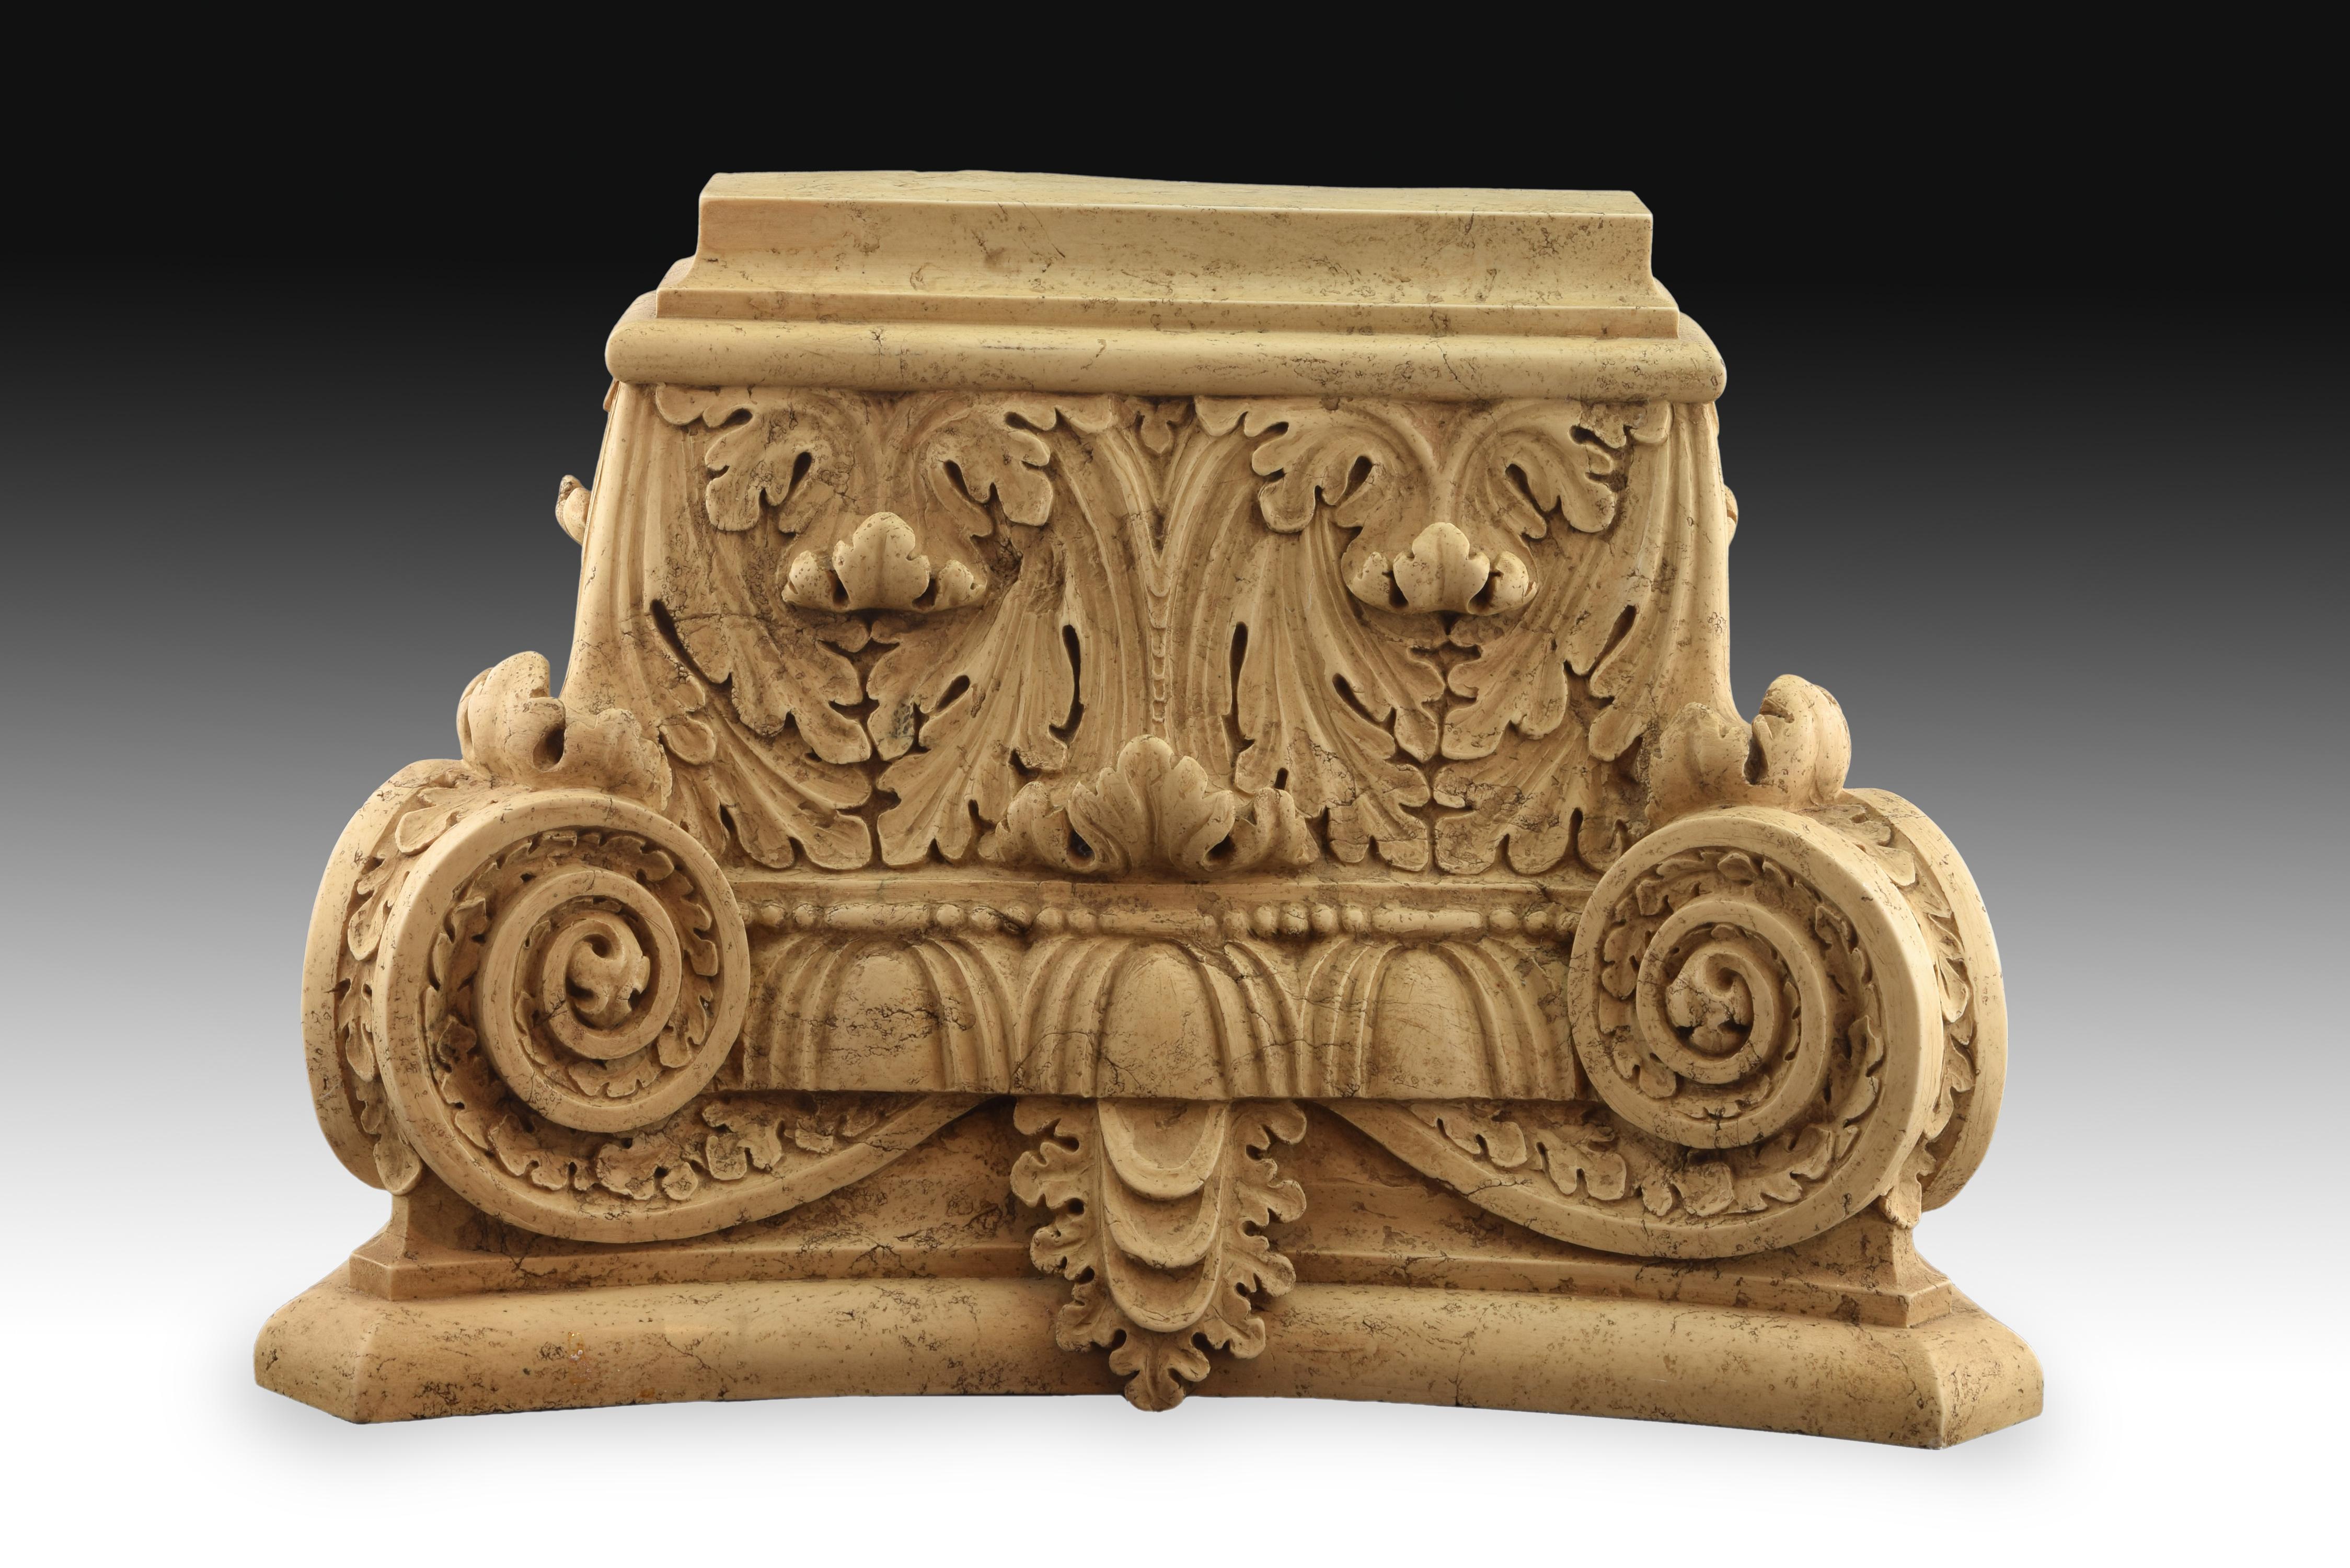 Classical style capital. Modeled alabaster (resins and silica gel composition). 20th century.
Architectural capital composed of a series of smooth moldings above and below, and rows of acanthus leaves carved under scrolls decorated with plant